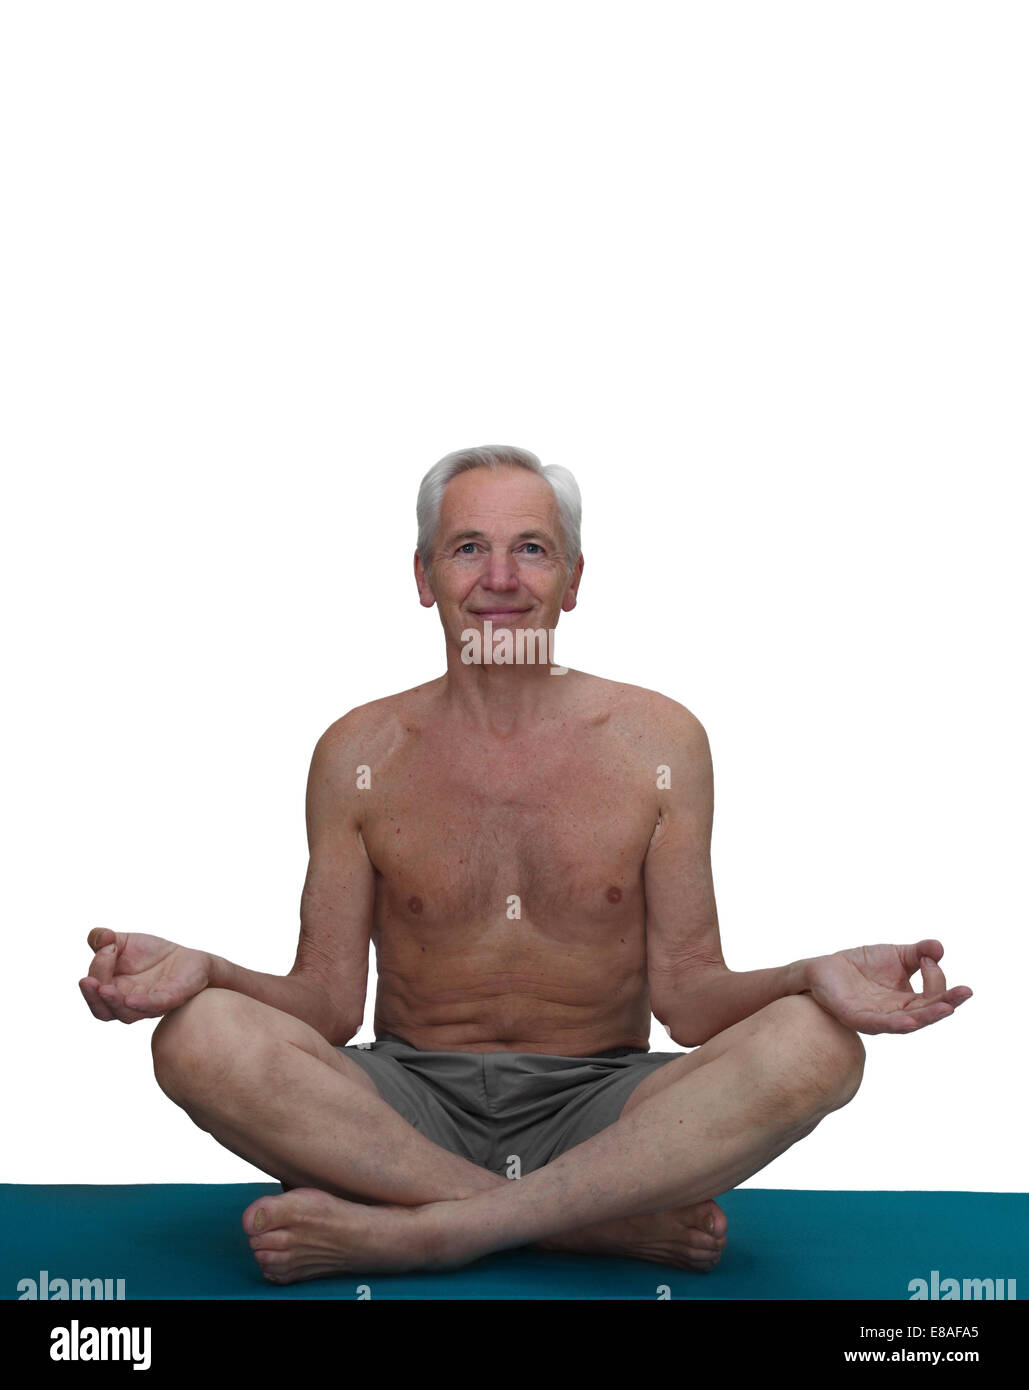 Yogi man sits in lotus position on mat isolated on white background with copy space Stock Photo